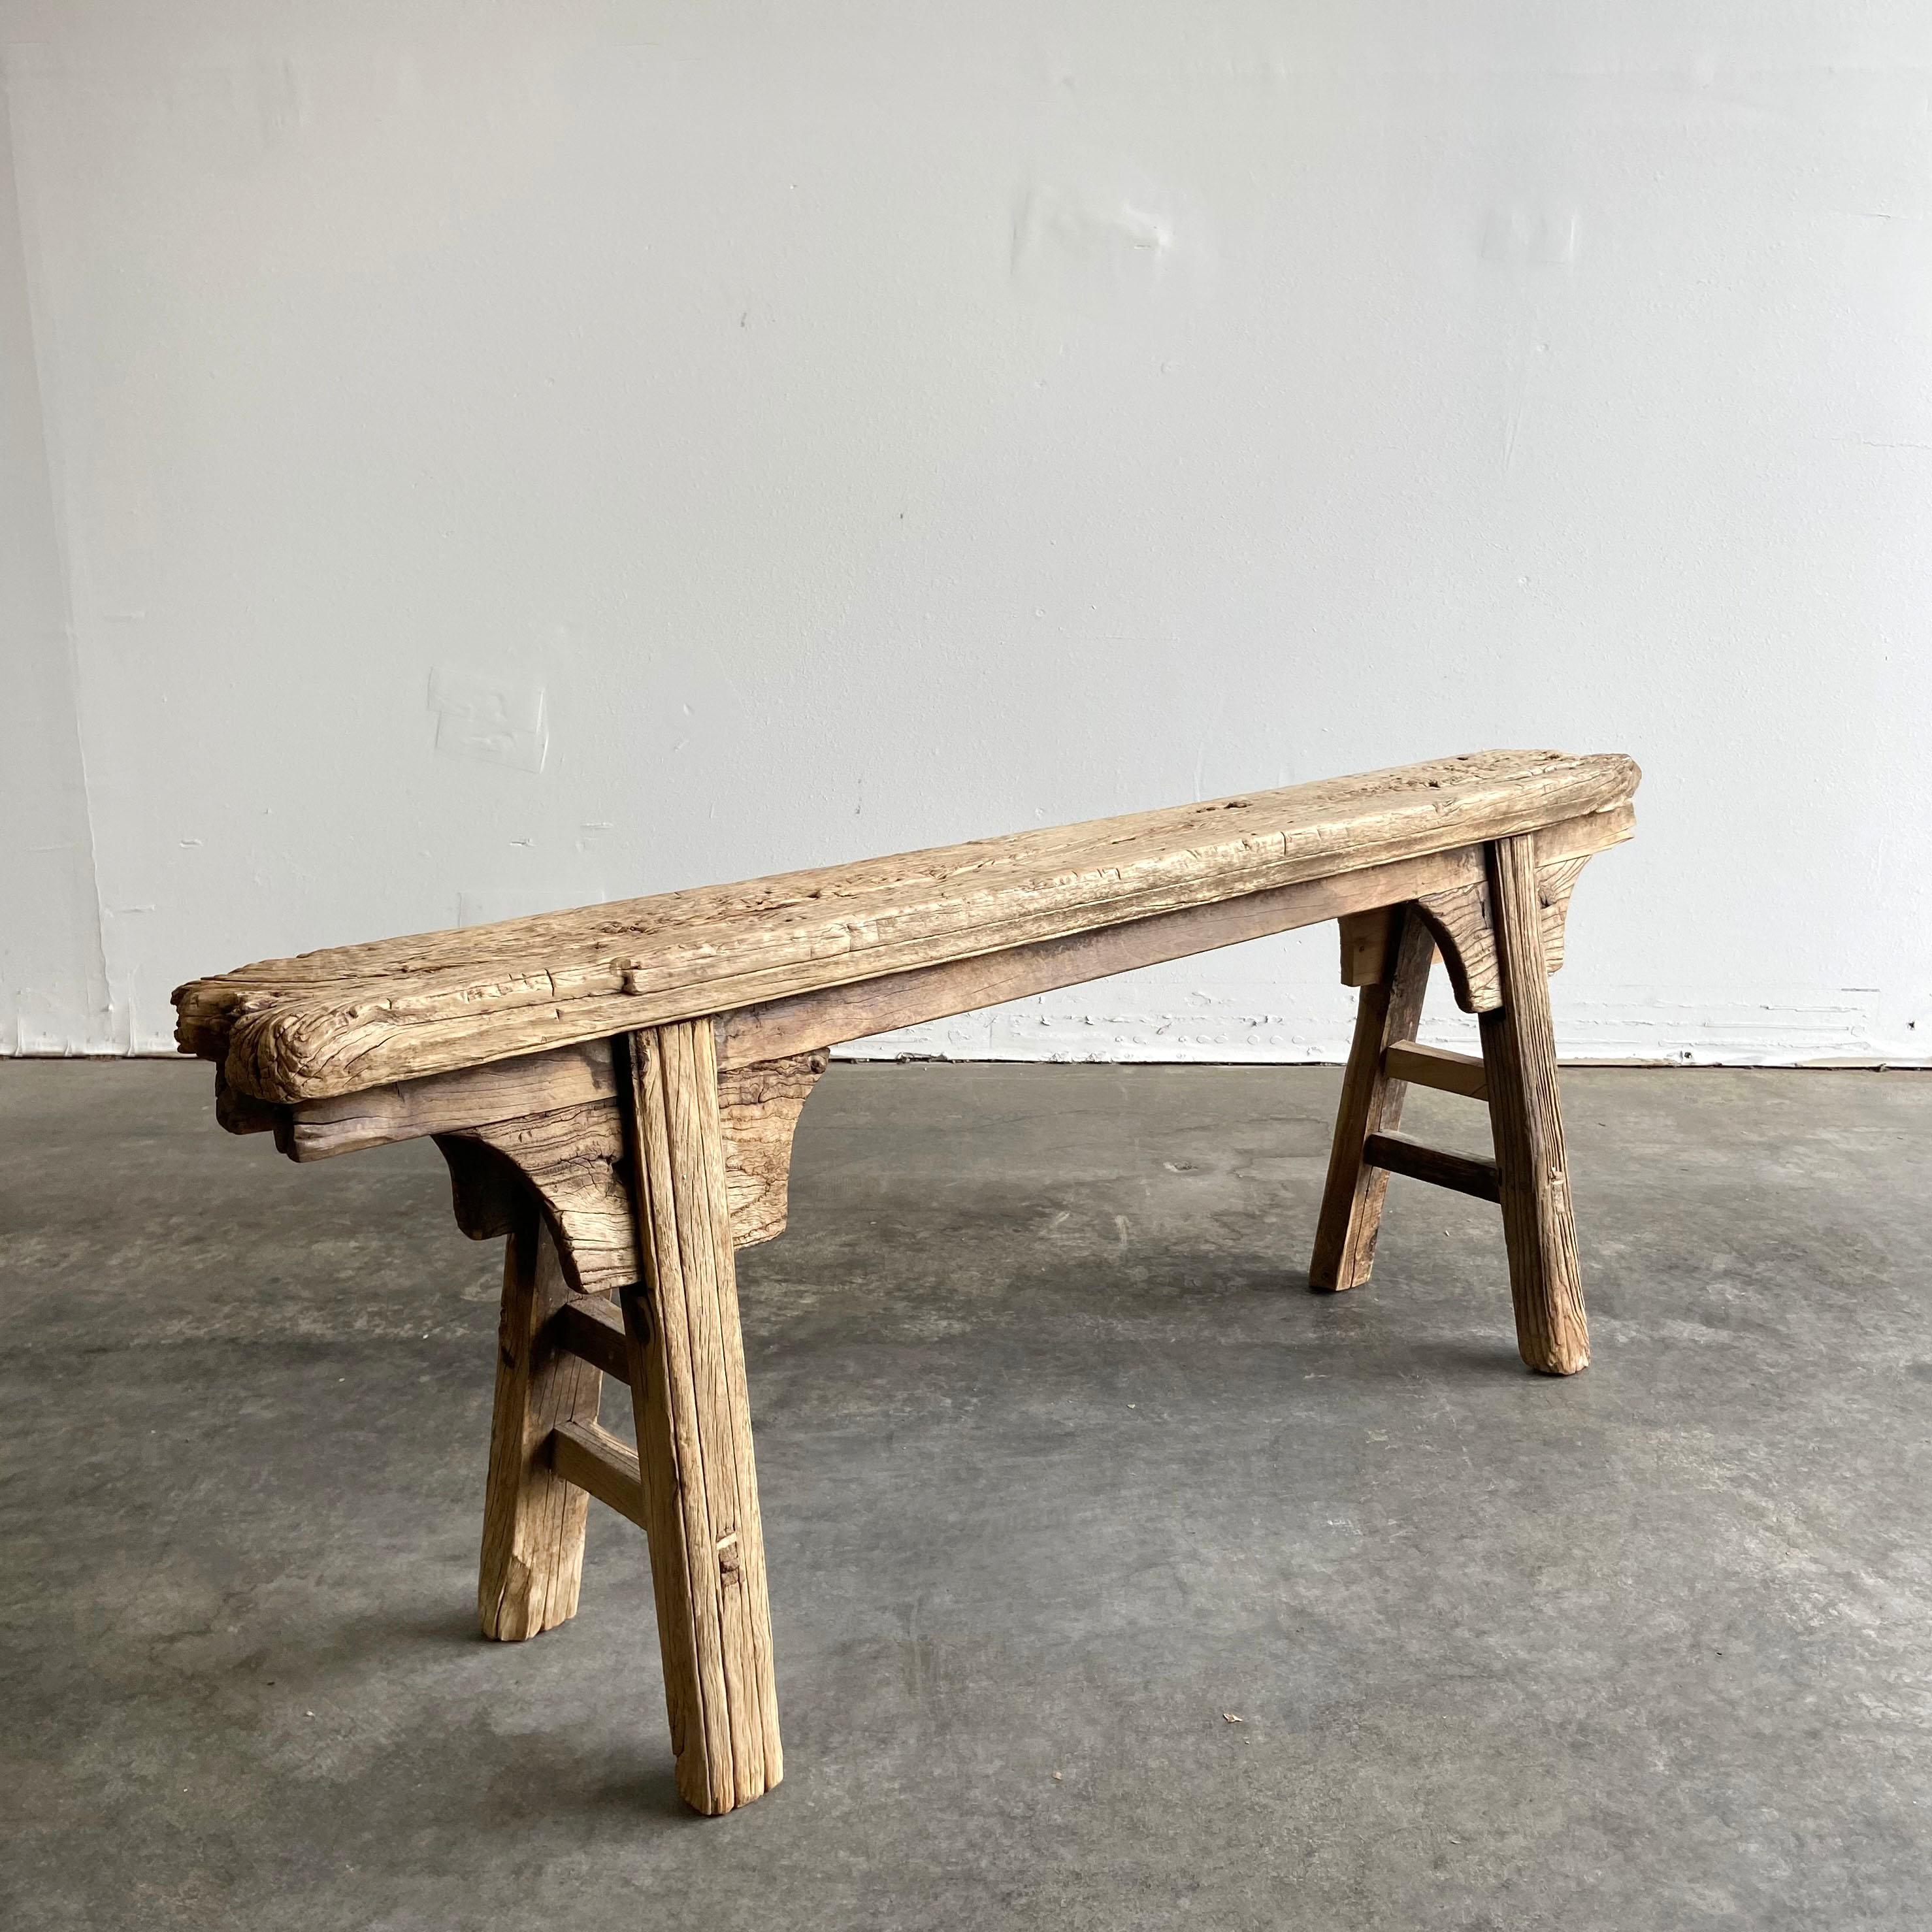 Vintage antique elm wood skinny bench.
These are the real vintage antique elm wood benches! Beautiful antique patina, with weathering and age, these are solid and sturdy ready for daily use, use as a table behind a sofa, stool, coffee table, they